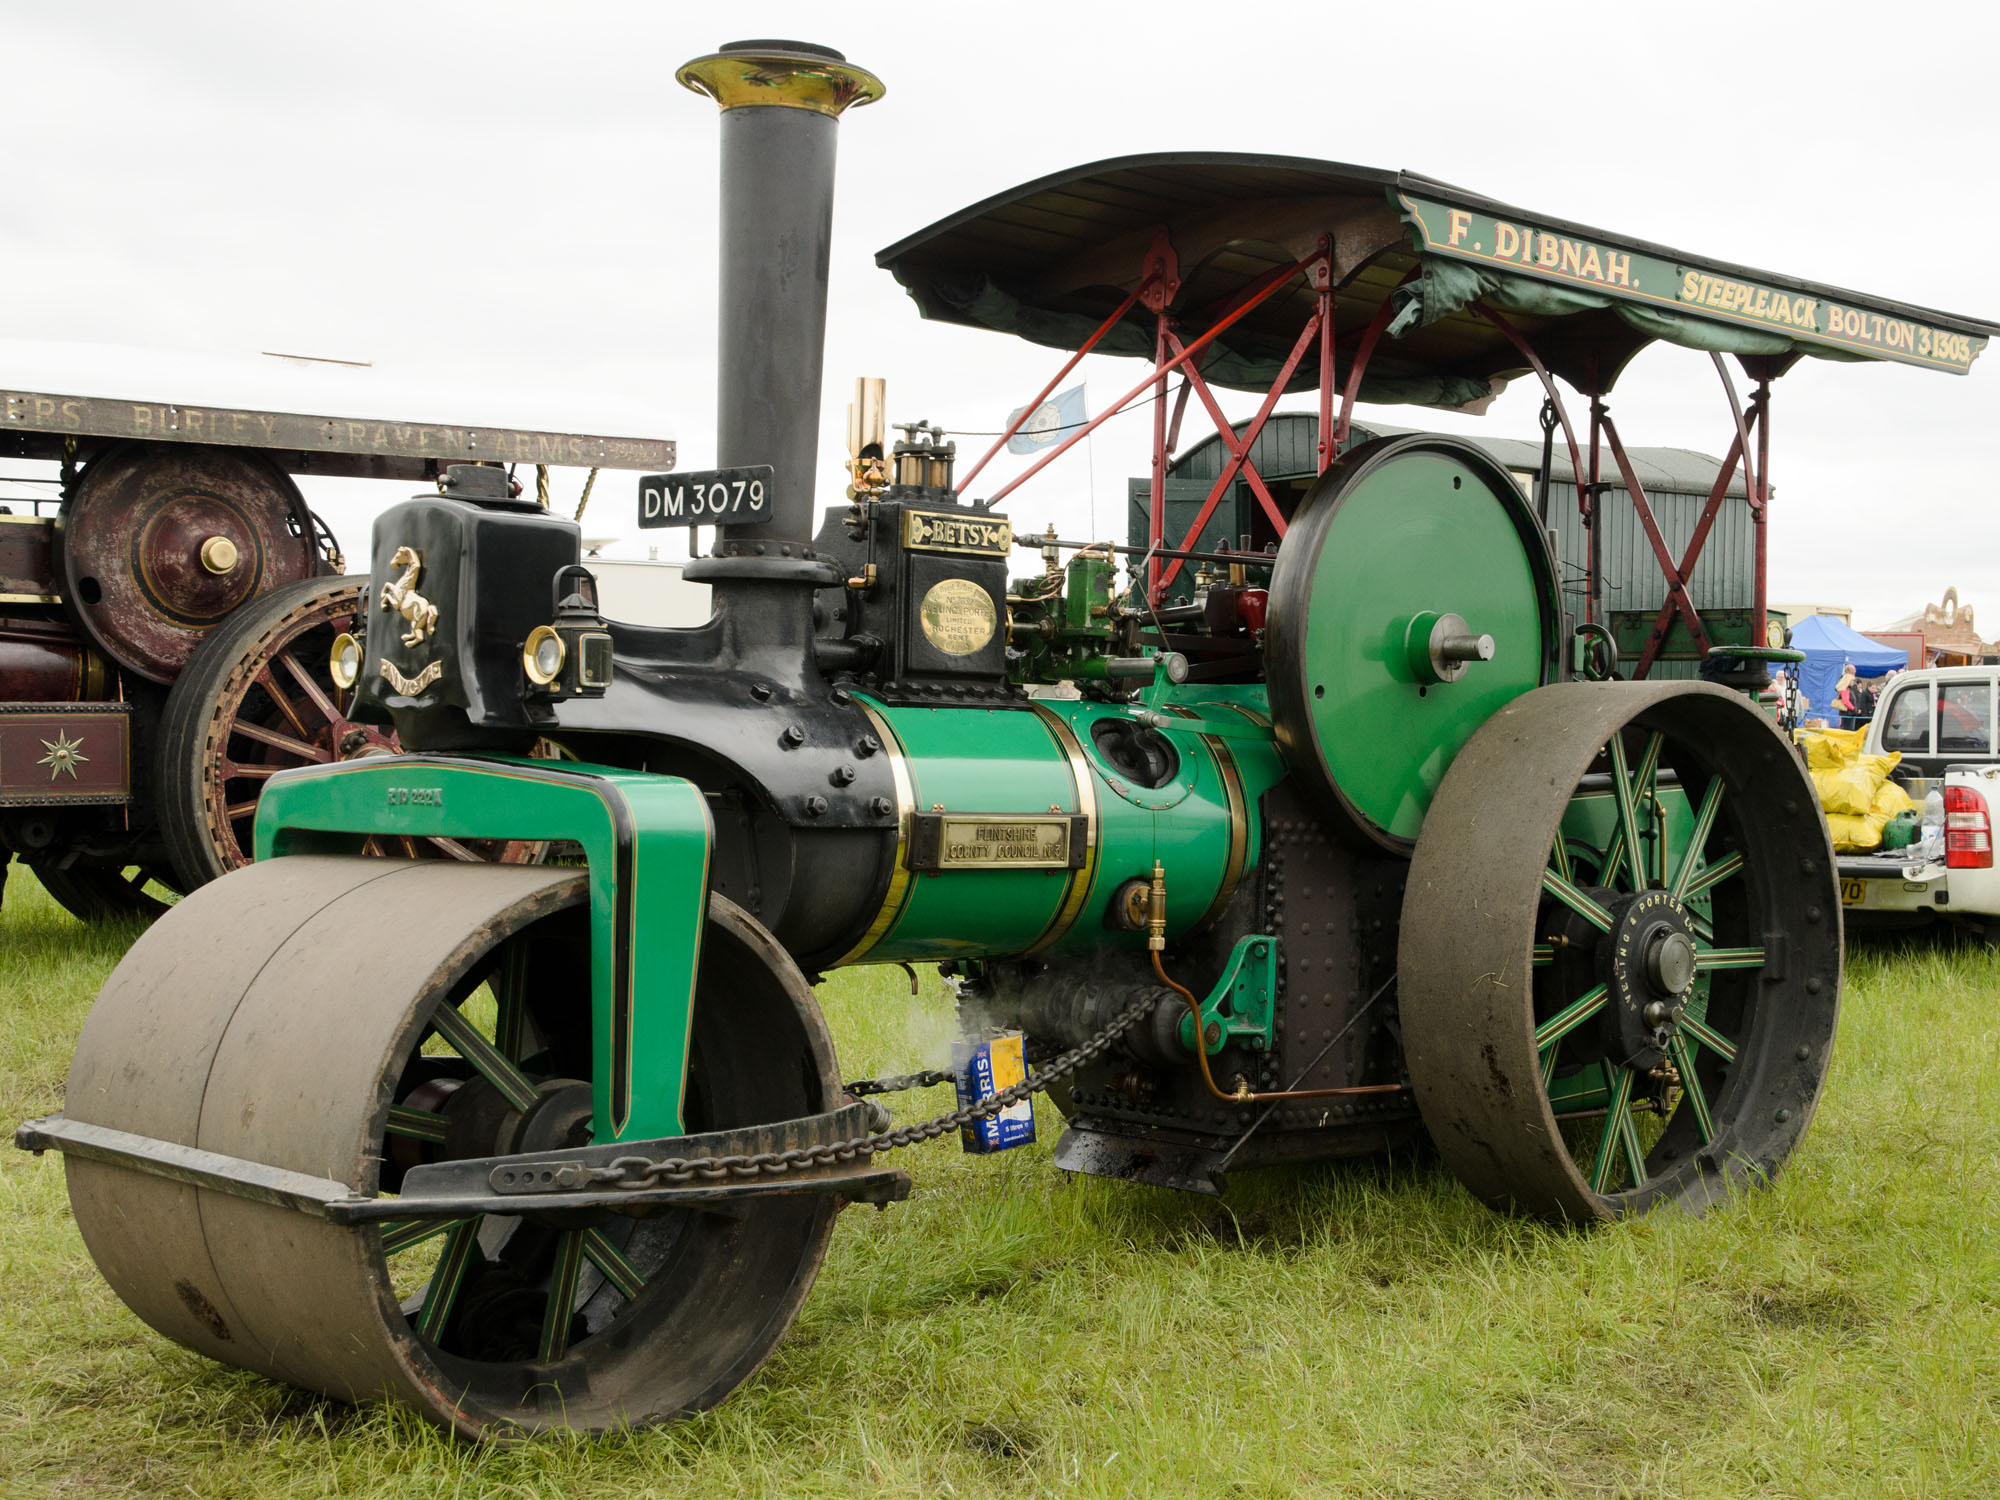 a steam locomotive sits parked in the grass